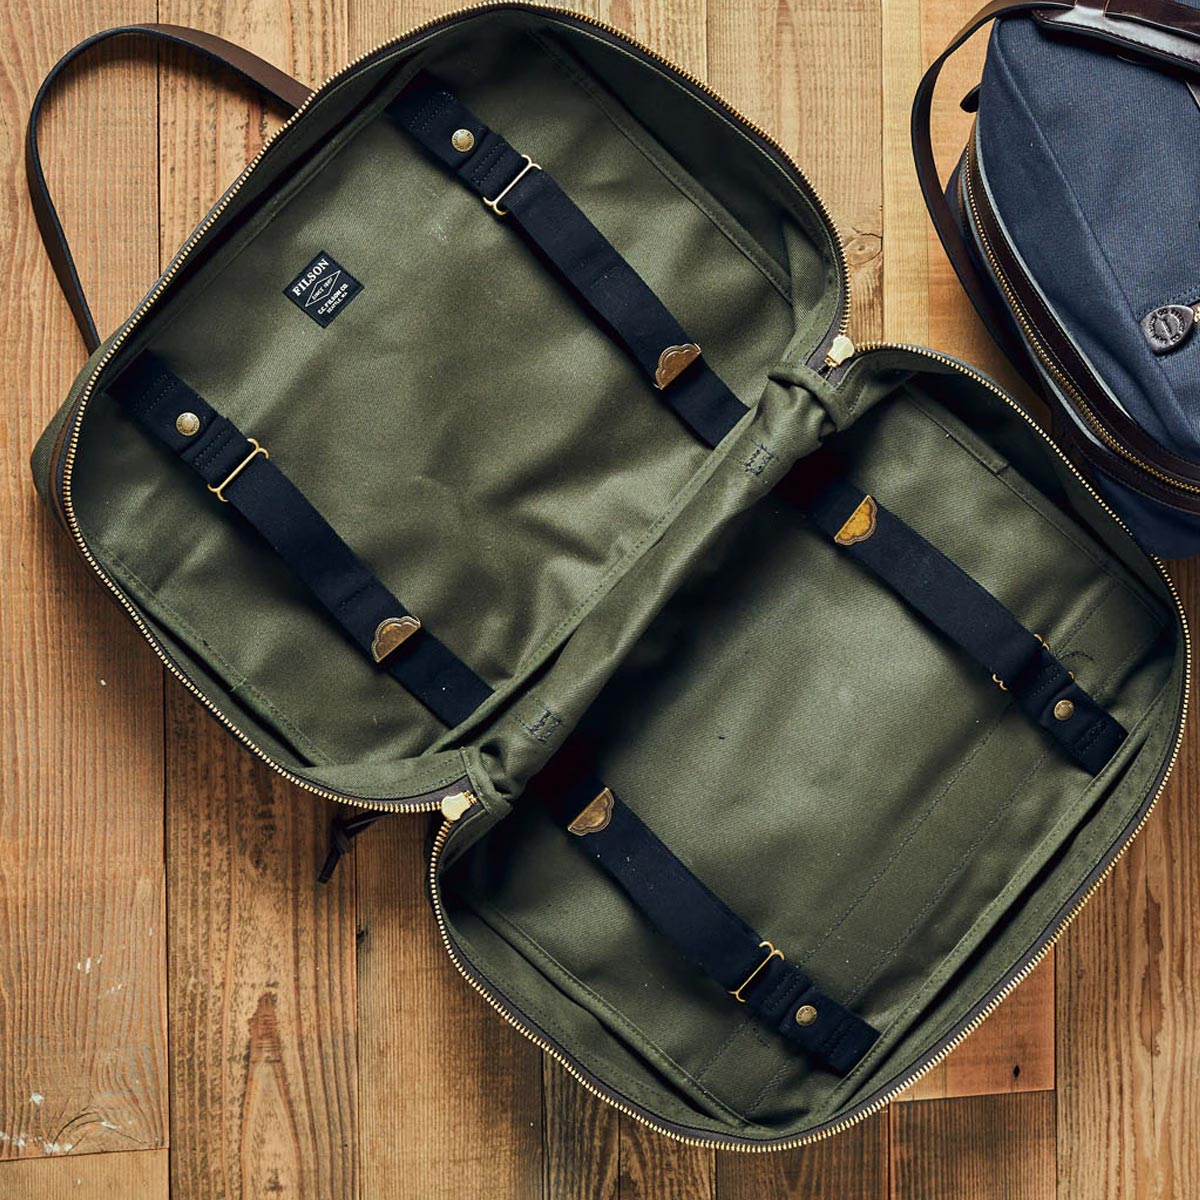 Filson Rugged Twill Pullman Small Otter Green, with a roomy interior that opens fully and lies flat for easy packing